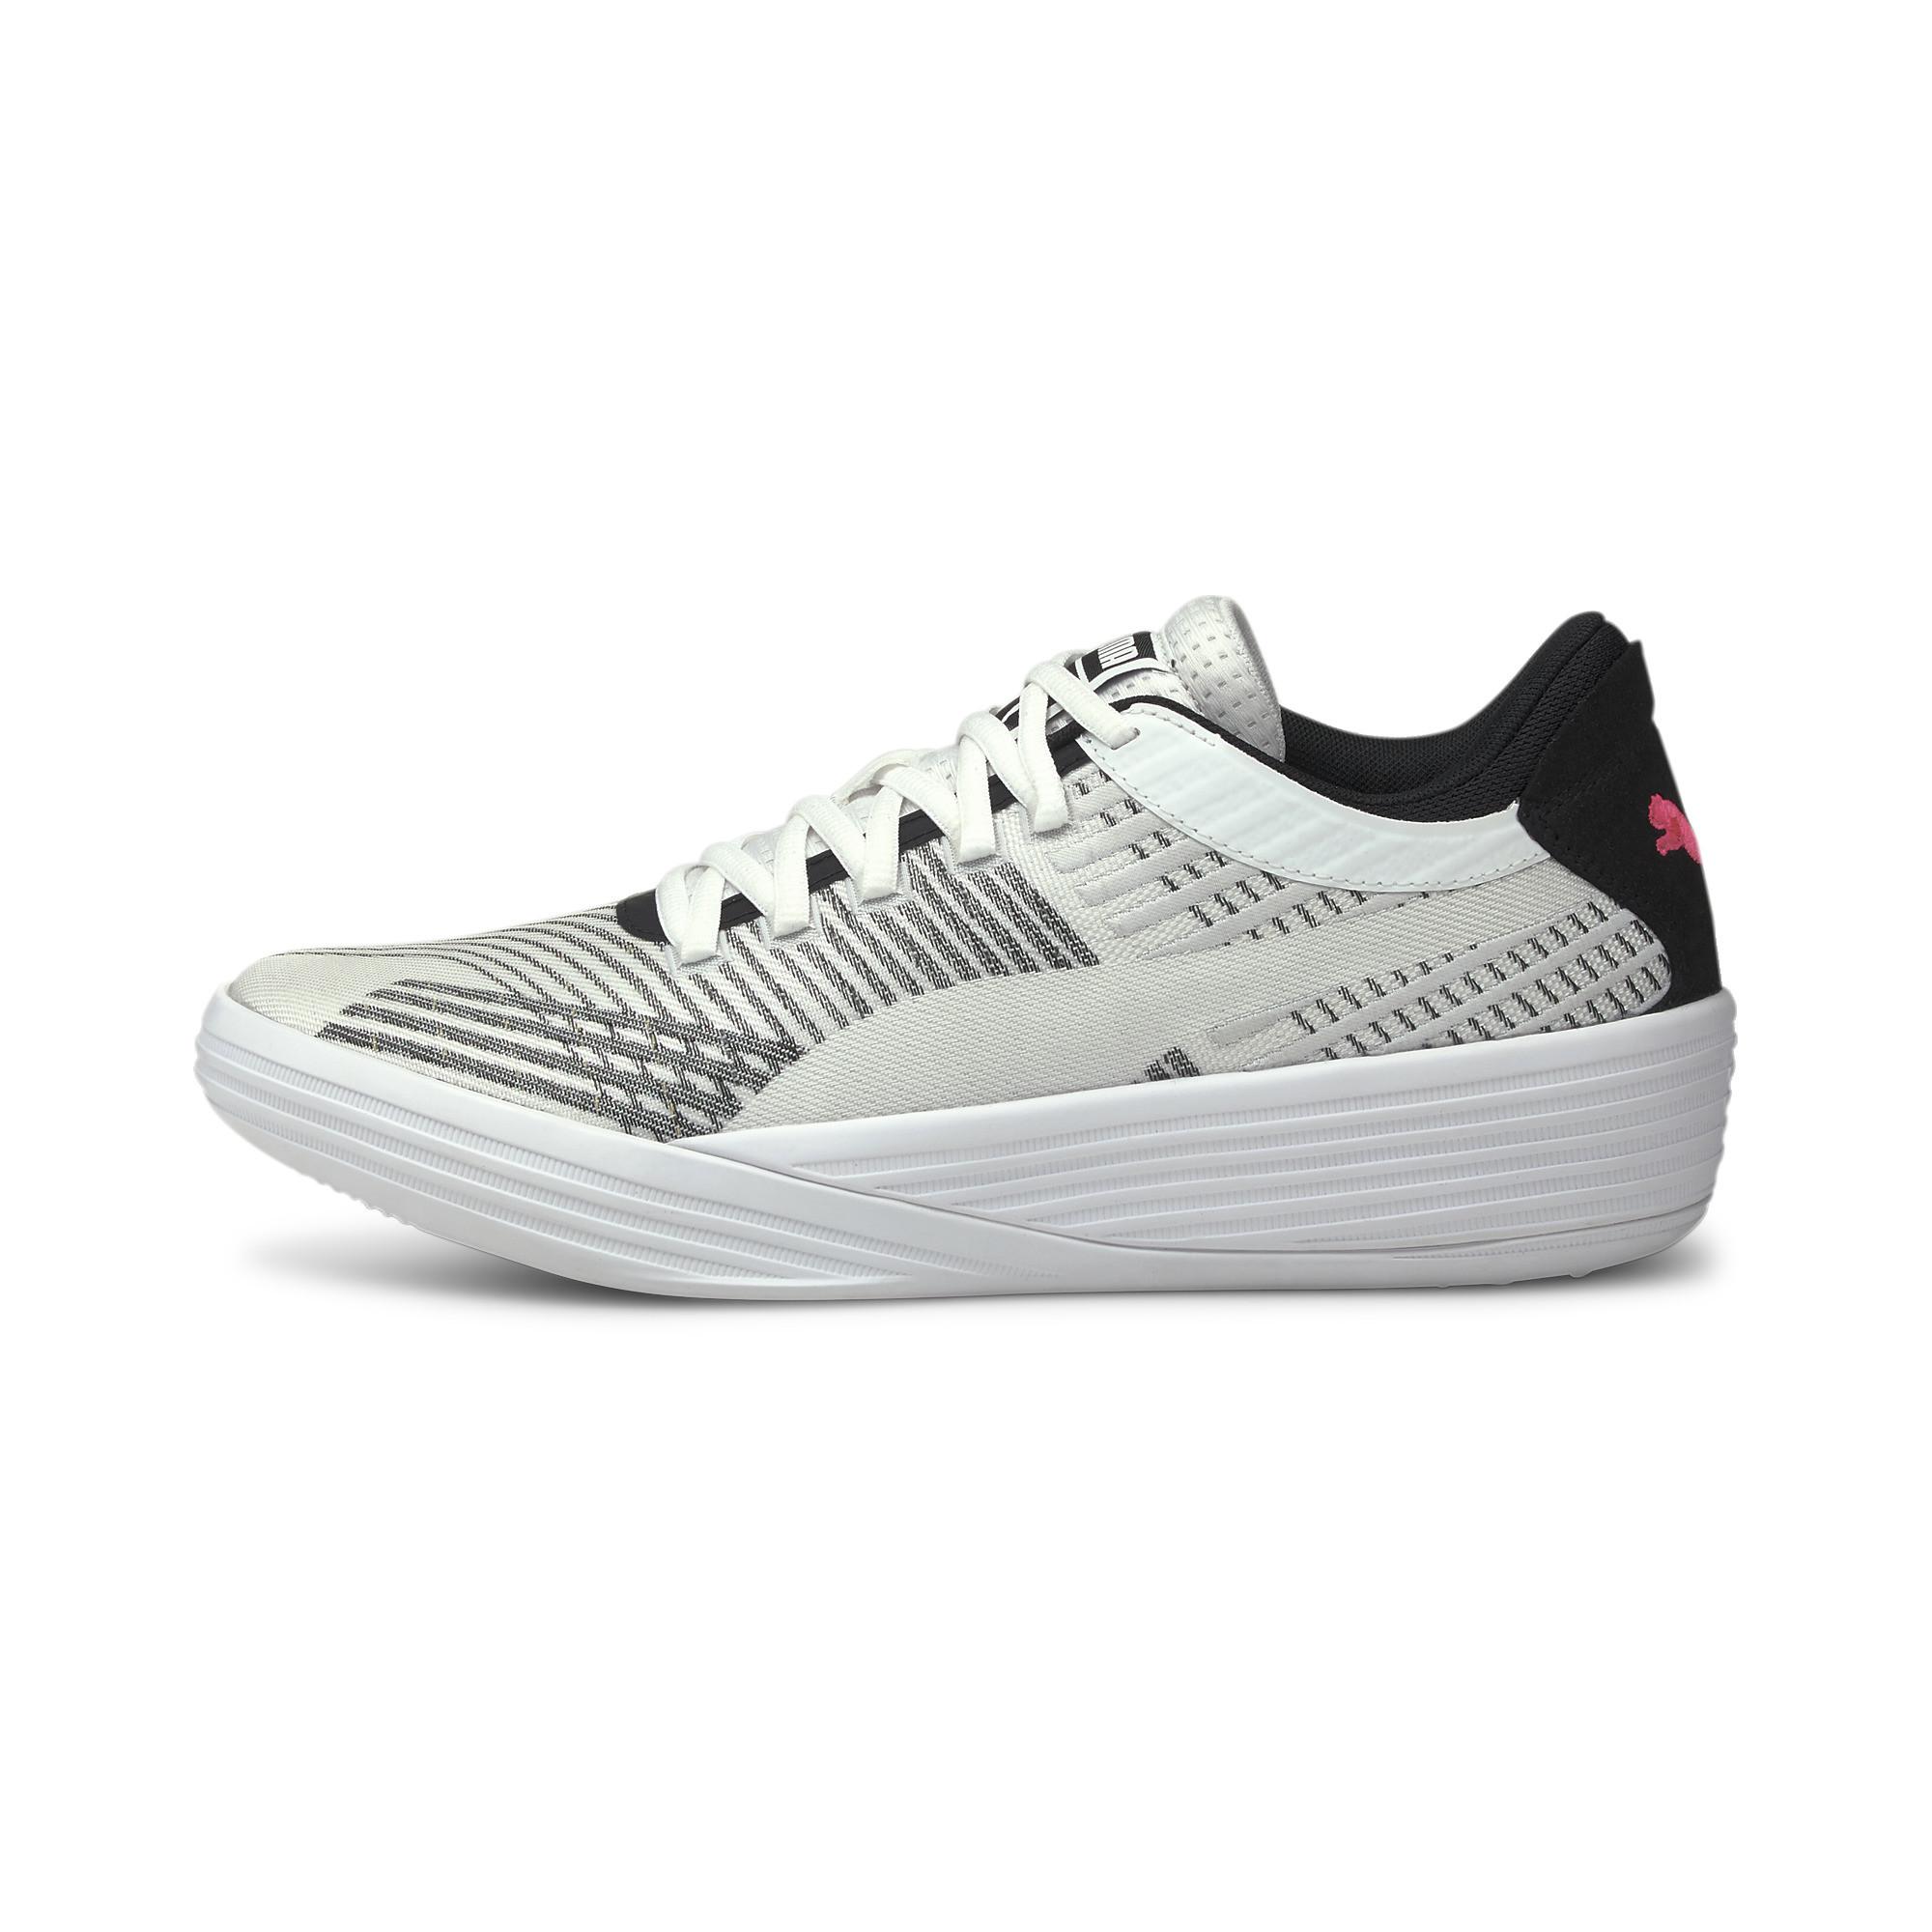 PUMA Clyde All-pro Basketball Shoes in 